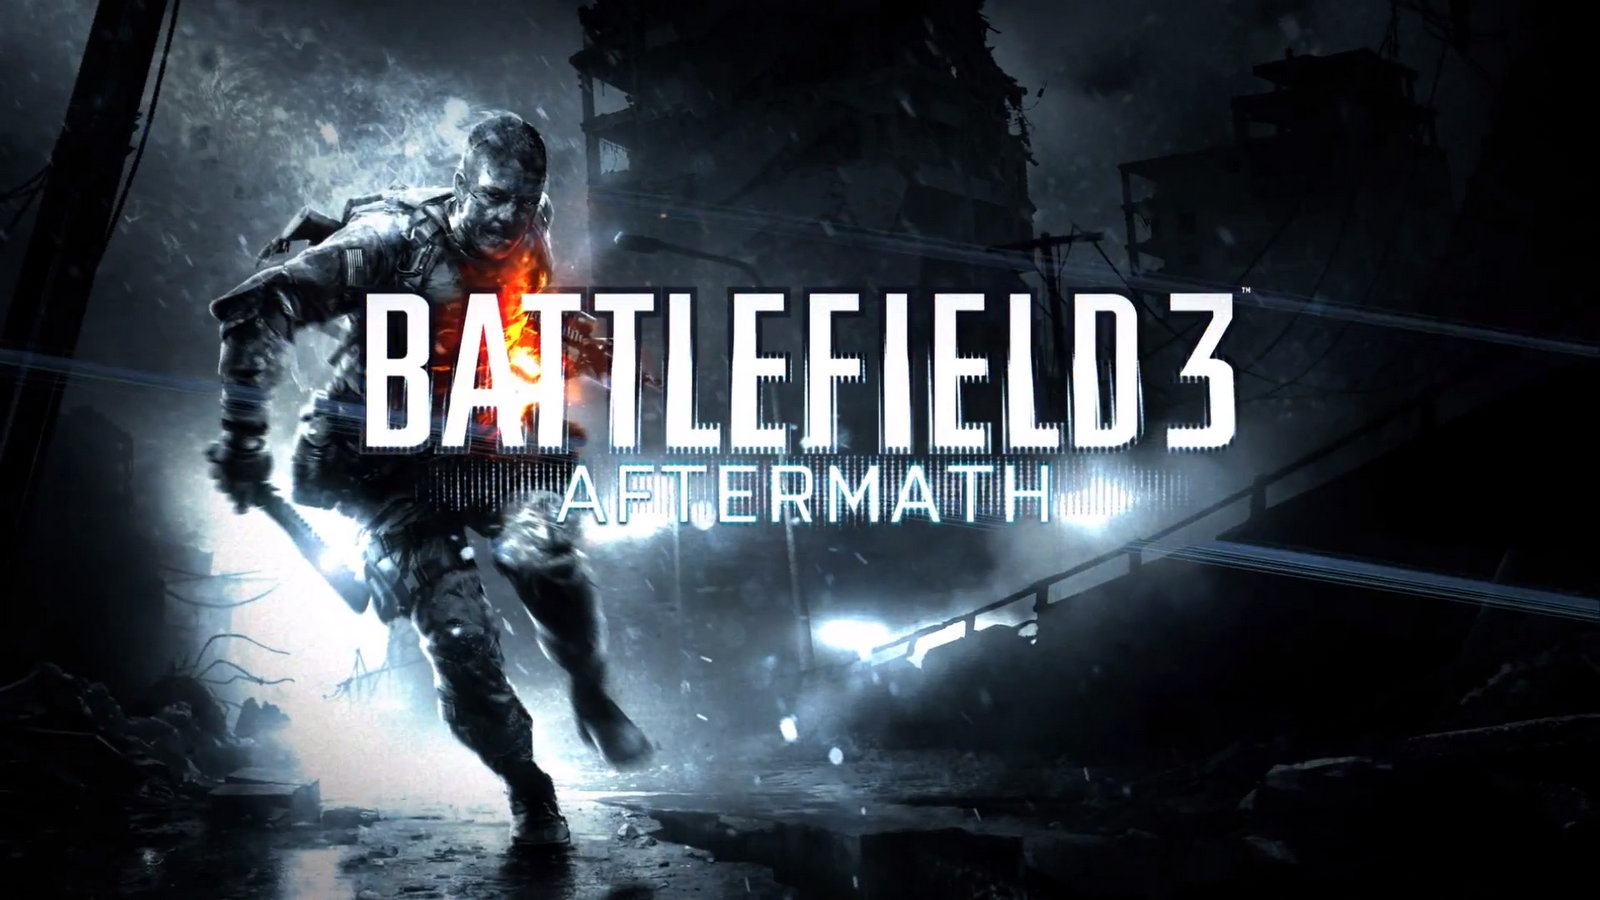 Battlefield 3 Aftermath Video Game HD Wallpapers Download HD Video 1600x900